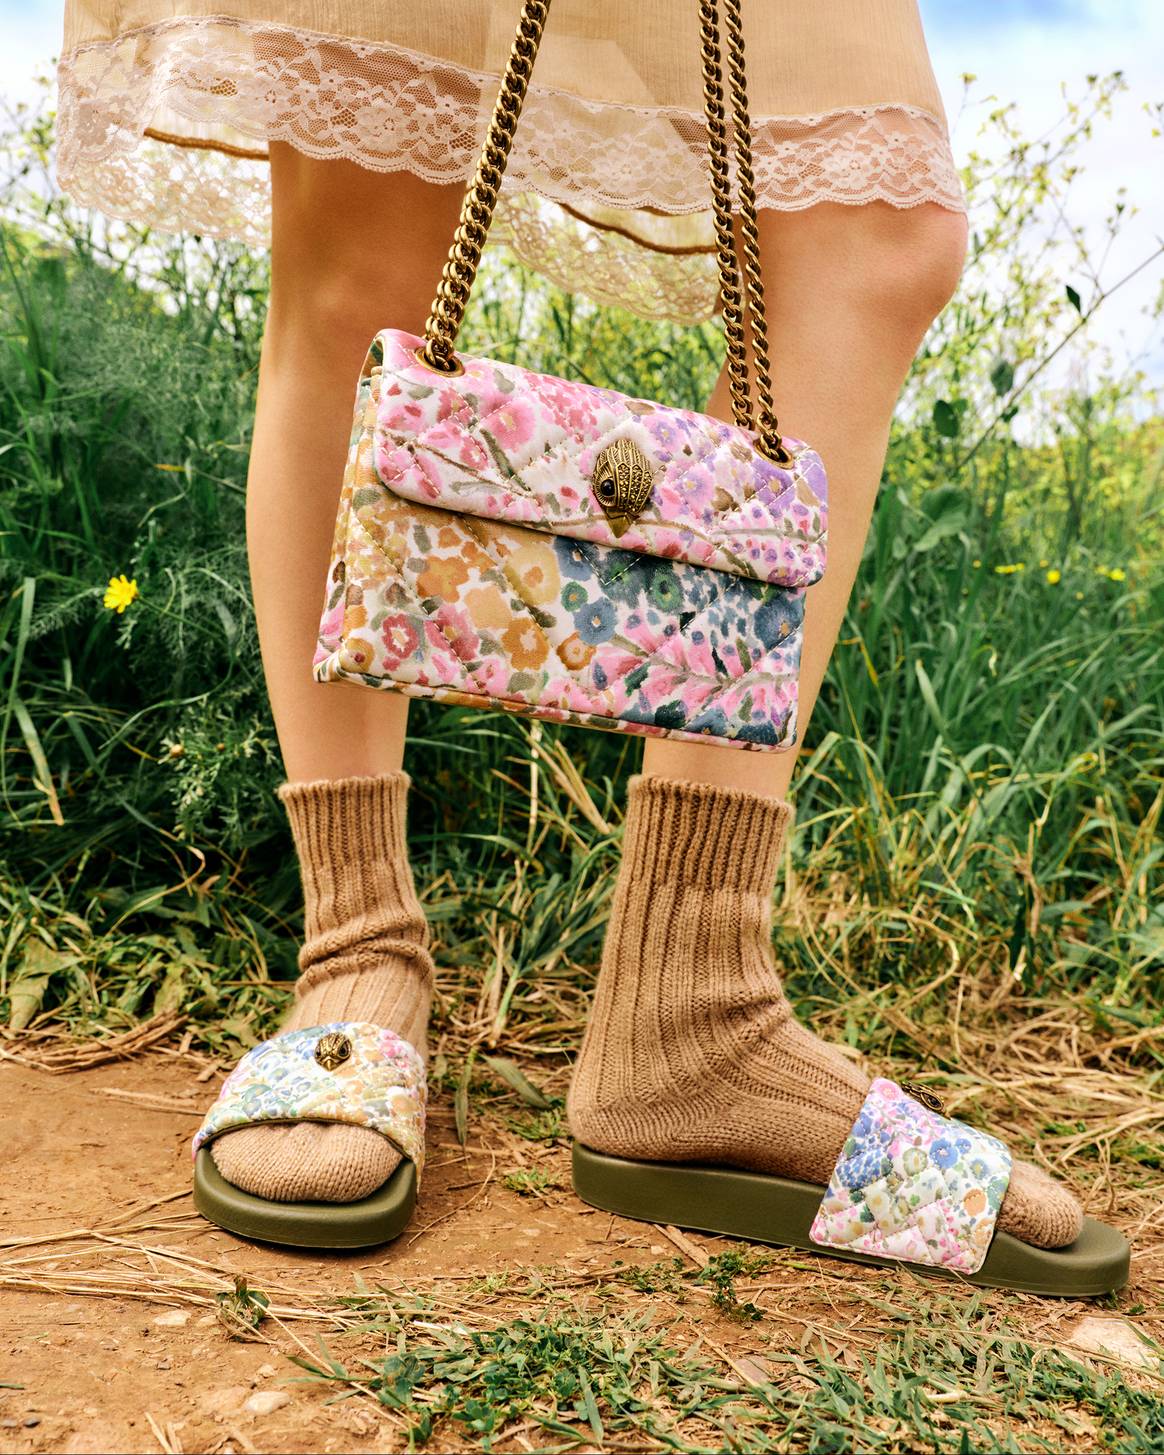 Kurt Geiger ‘Floral Couture’ capsule collection